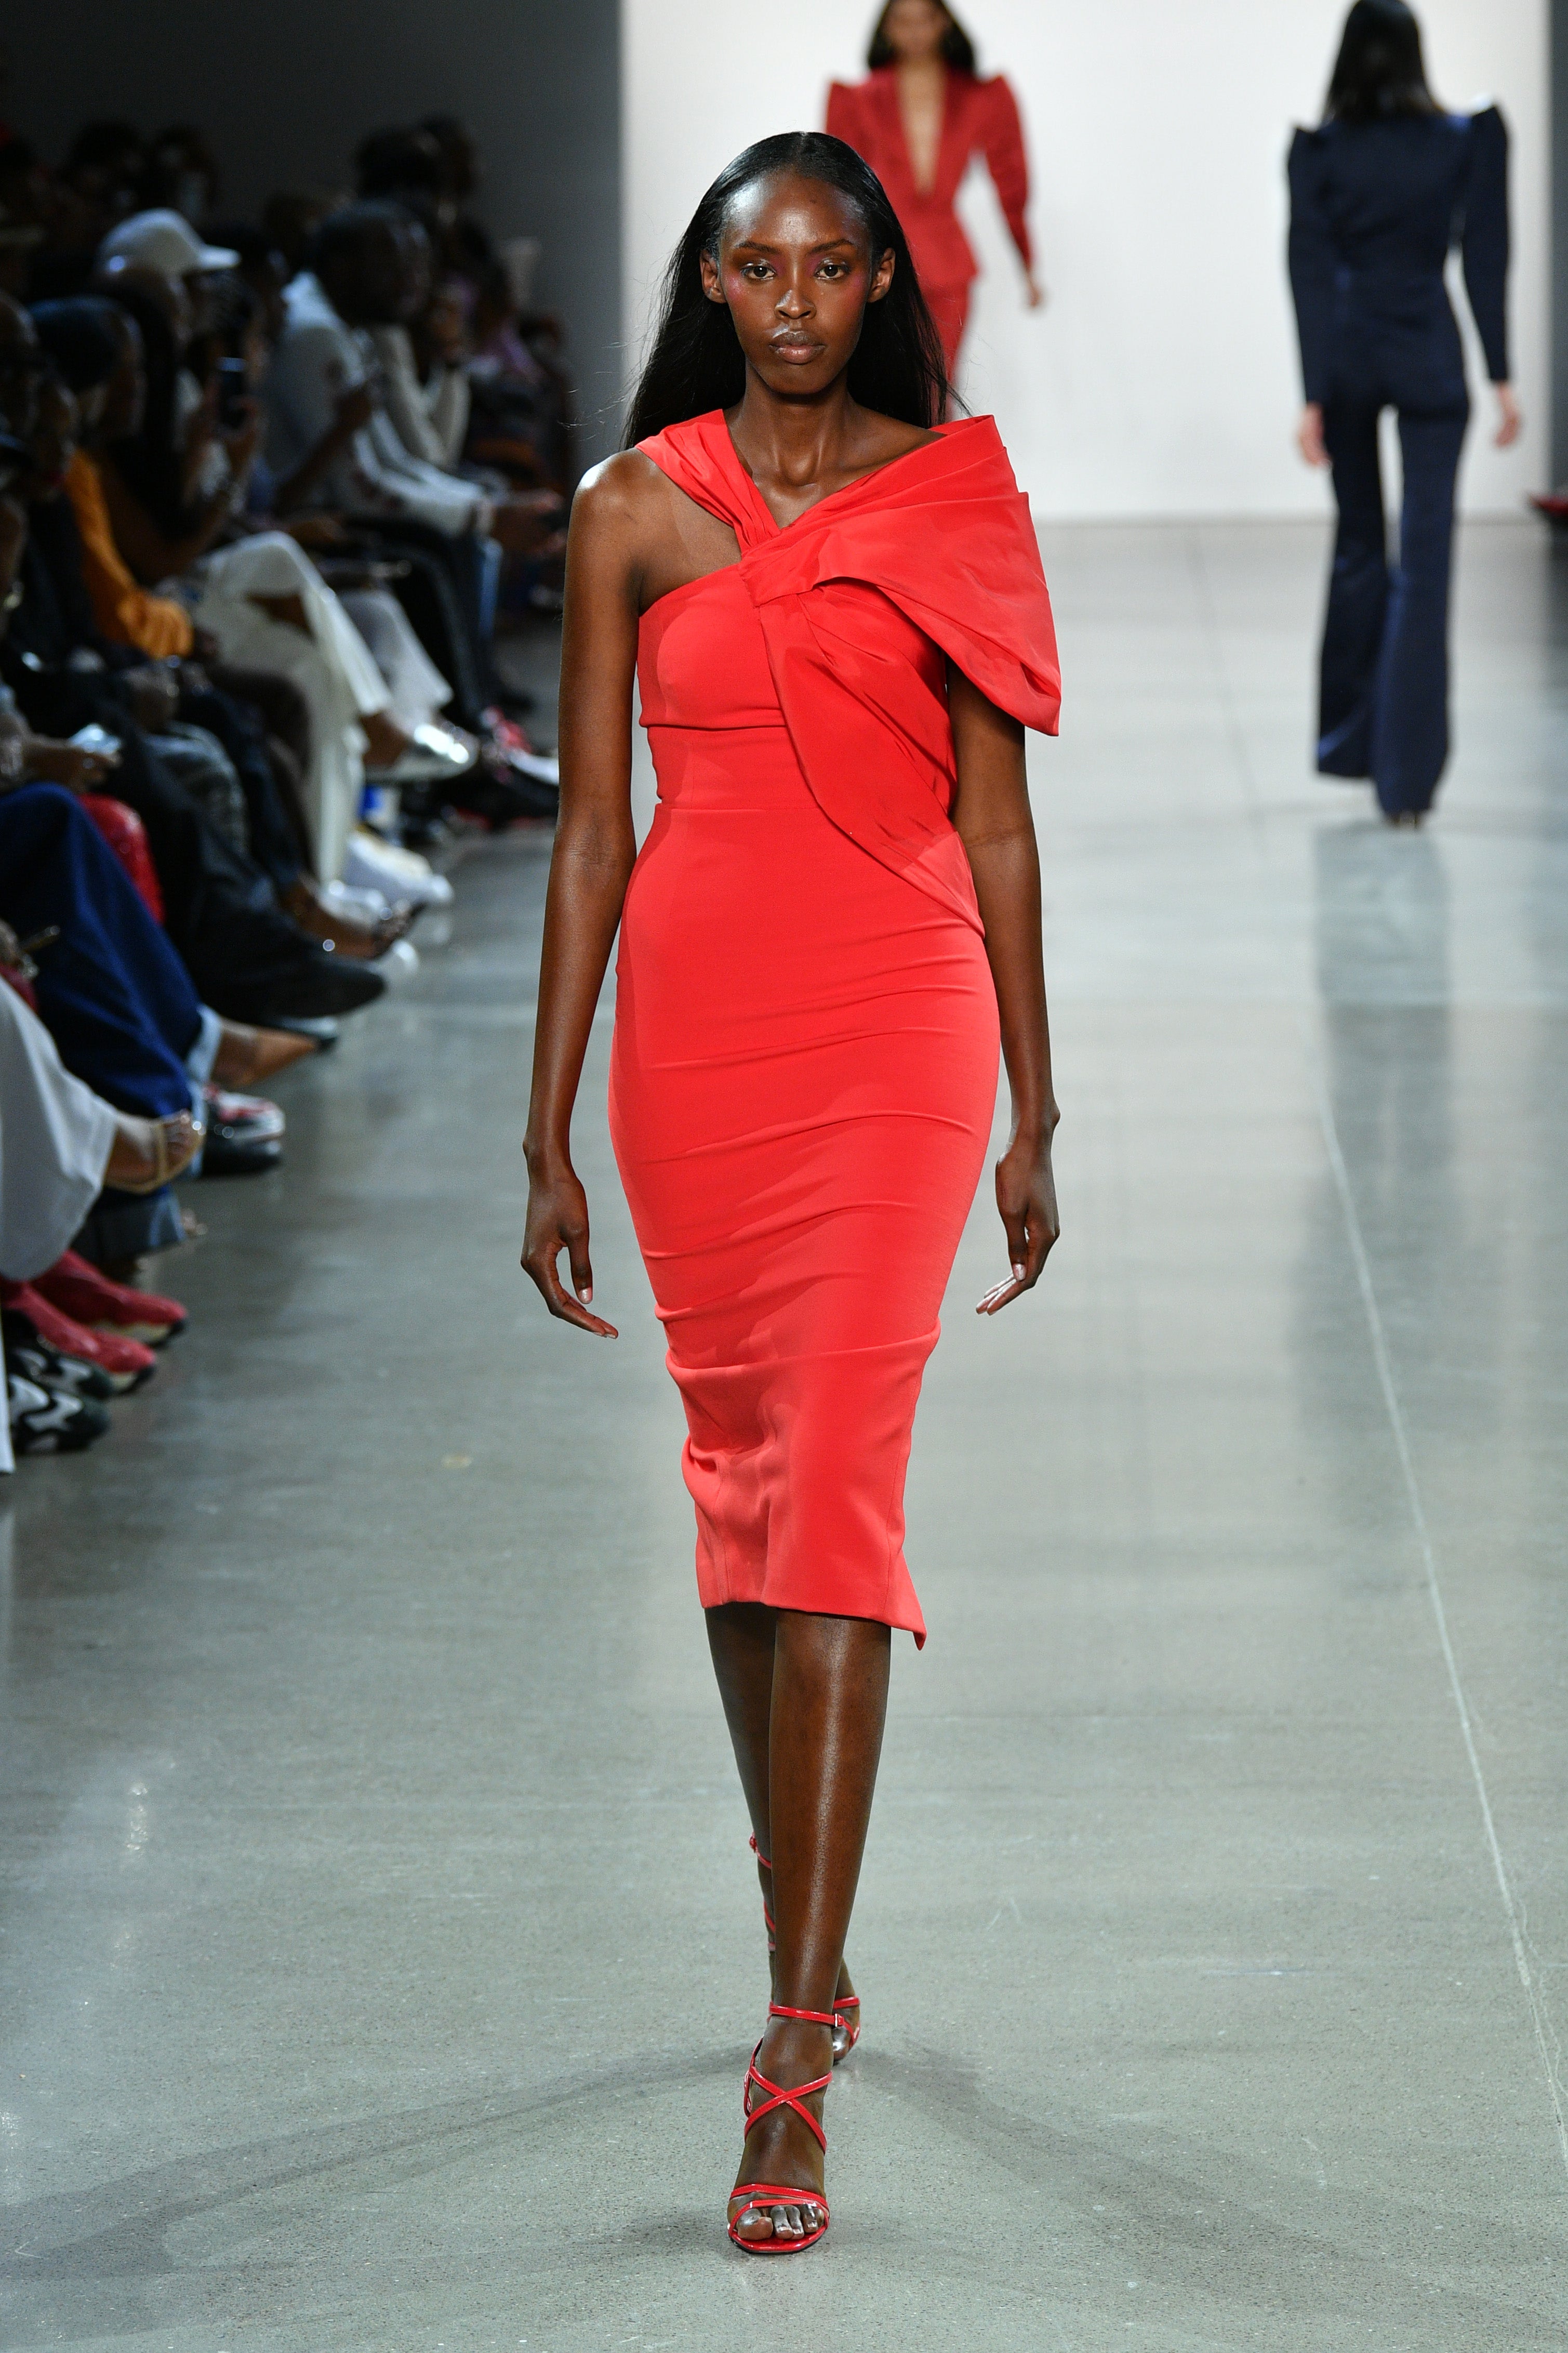 NYFW: Aliette’s Spring/Summer 2020 Collection Paid Homage To Black Women